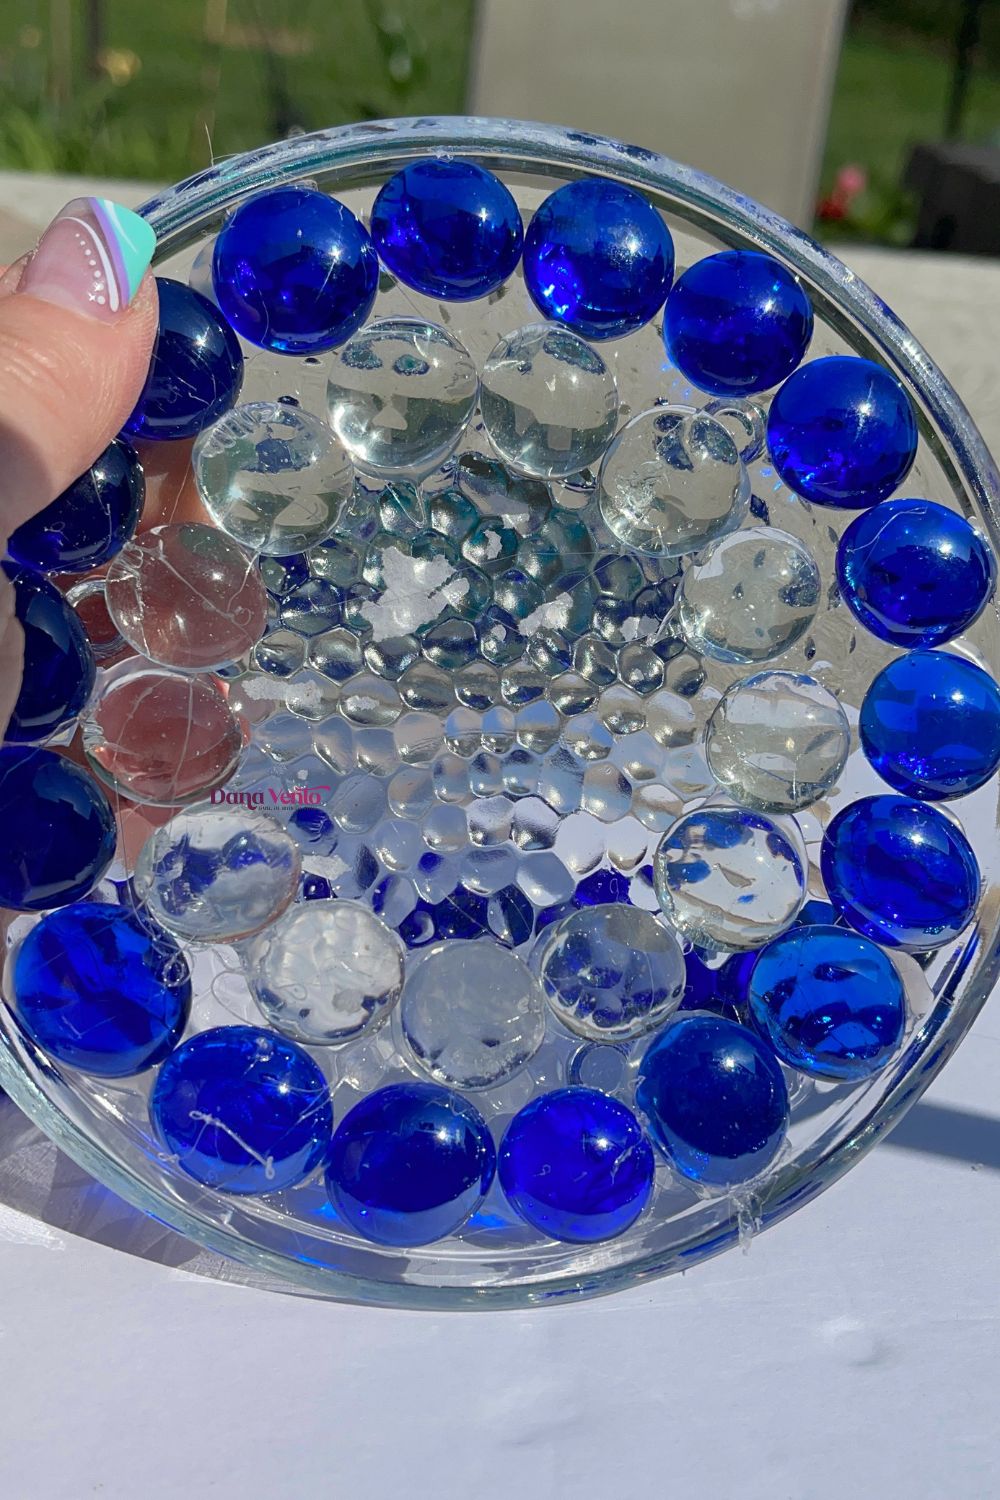 Colorful glass gems navy and white on Candle Rimmed Plate in process of making DIY Evil Eye Amulets